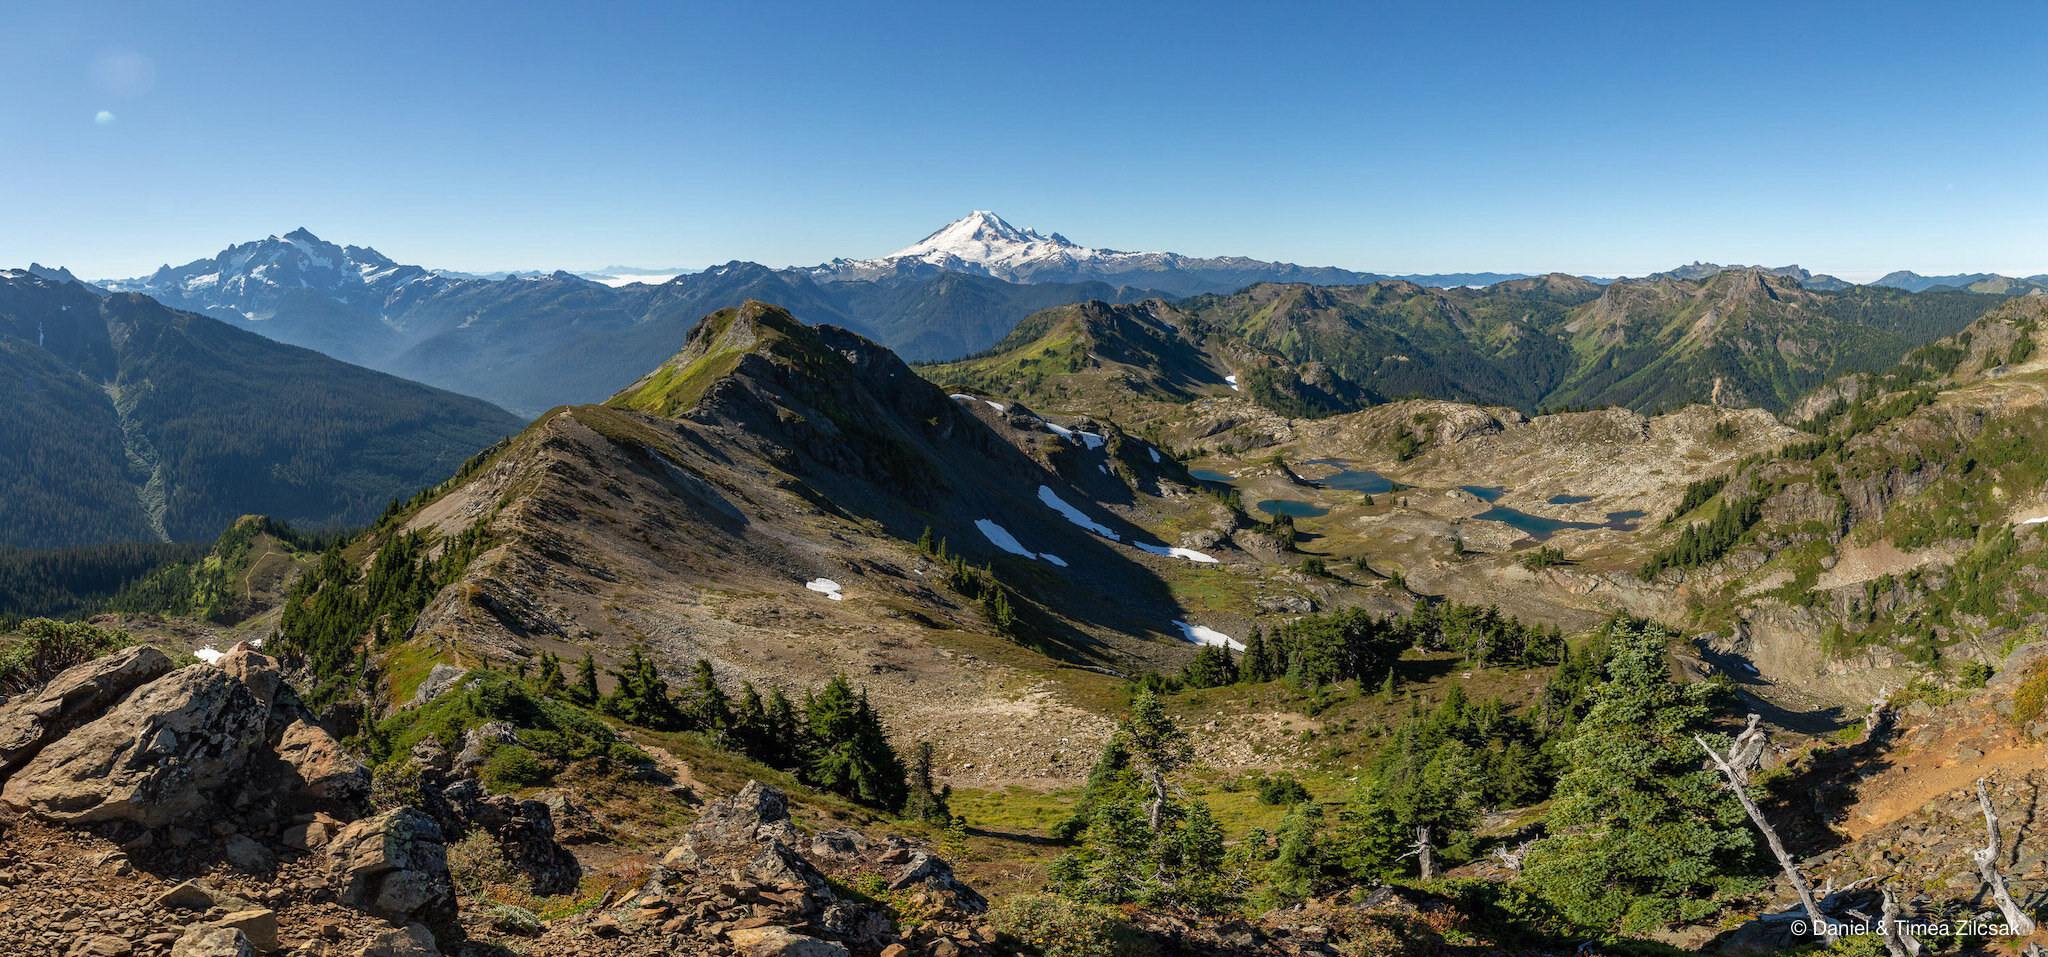 Panoramic view from the summit of Yellow Aster Butte